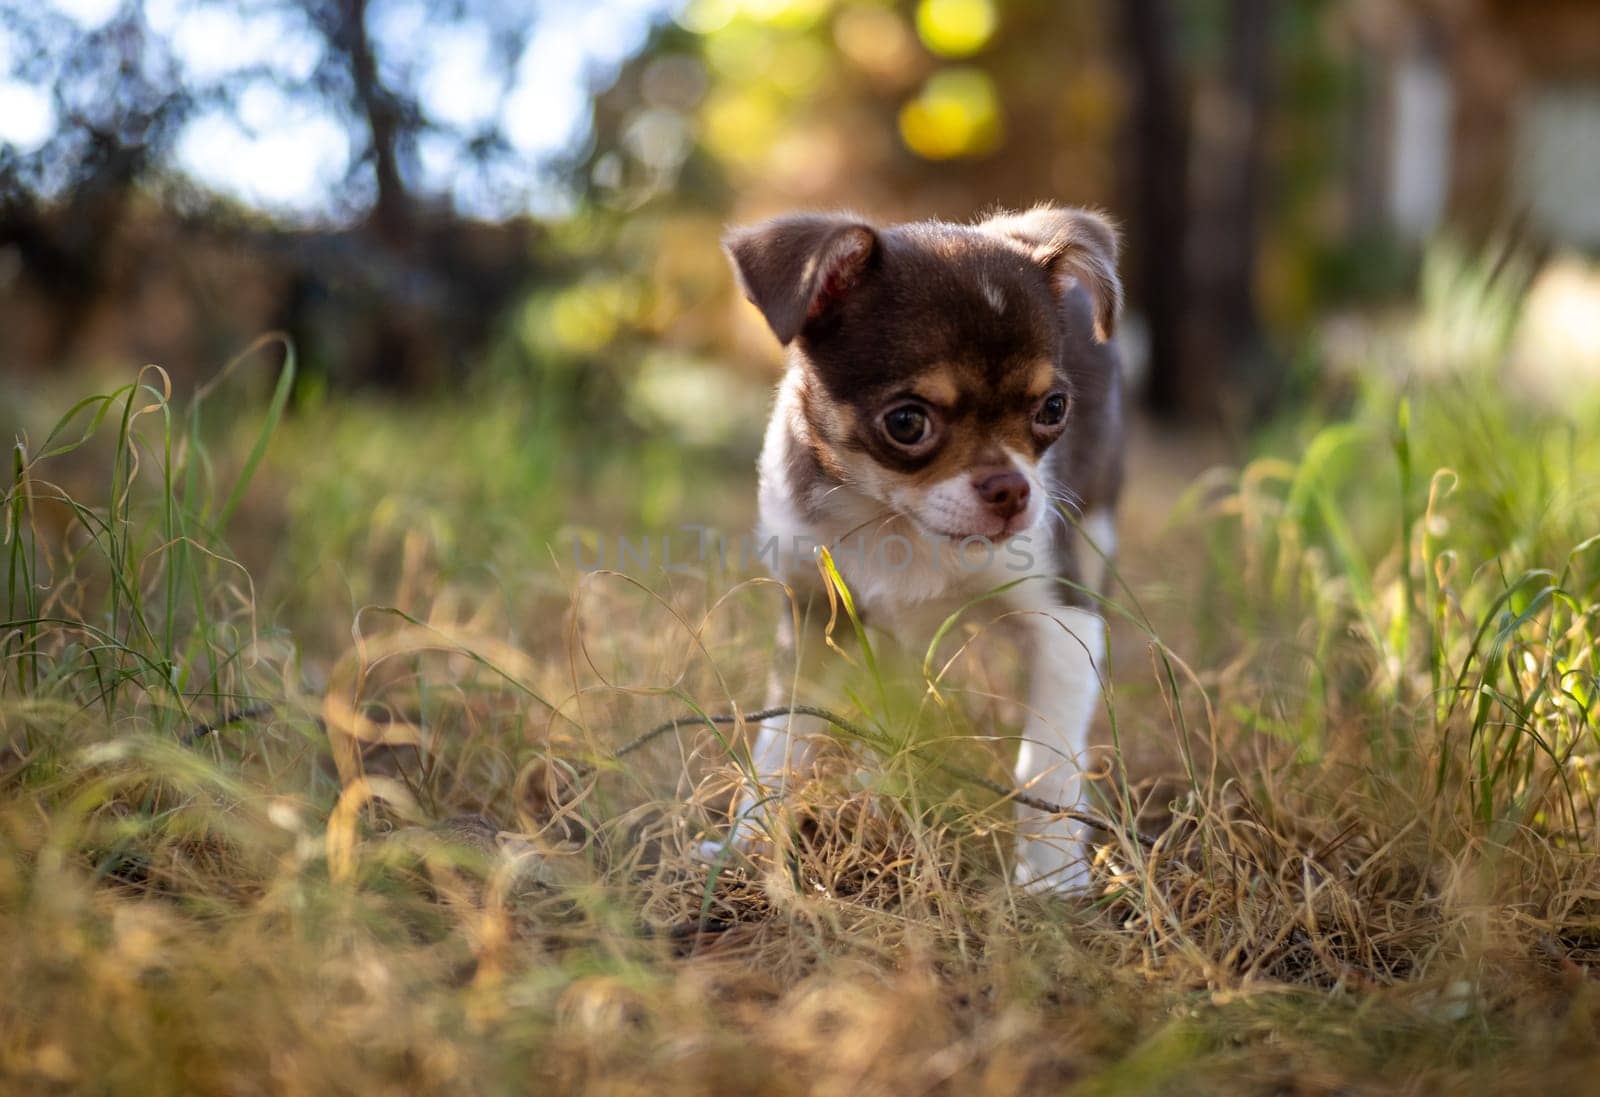 Tiny Chihuahua Puppy Amidst the Tall Grass by gcm